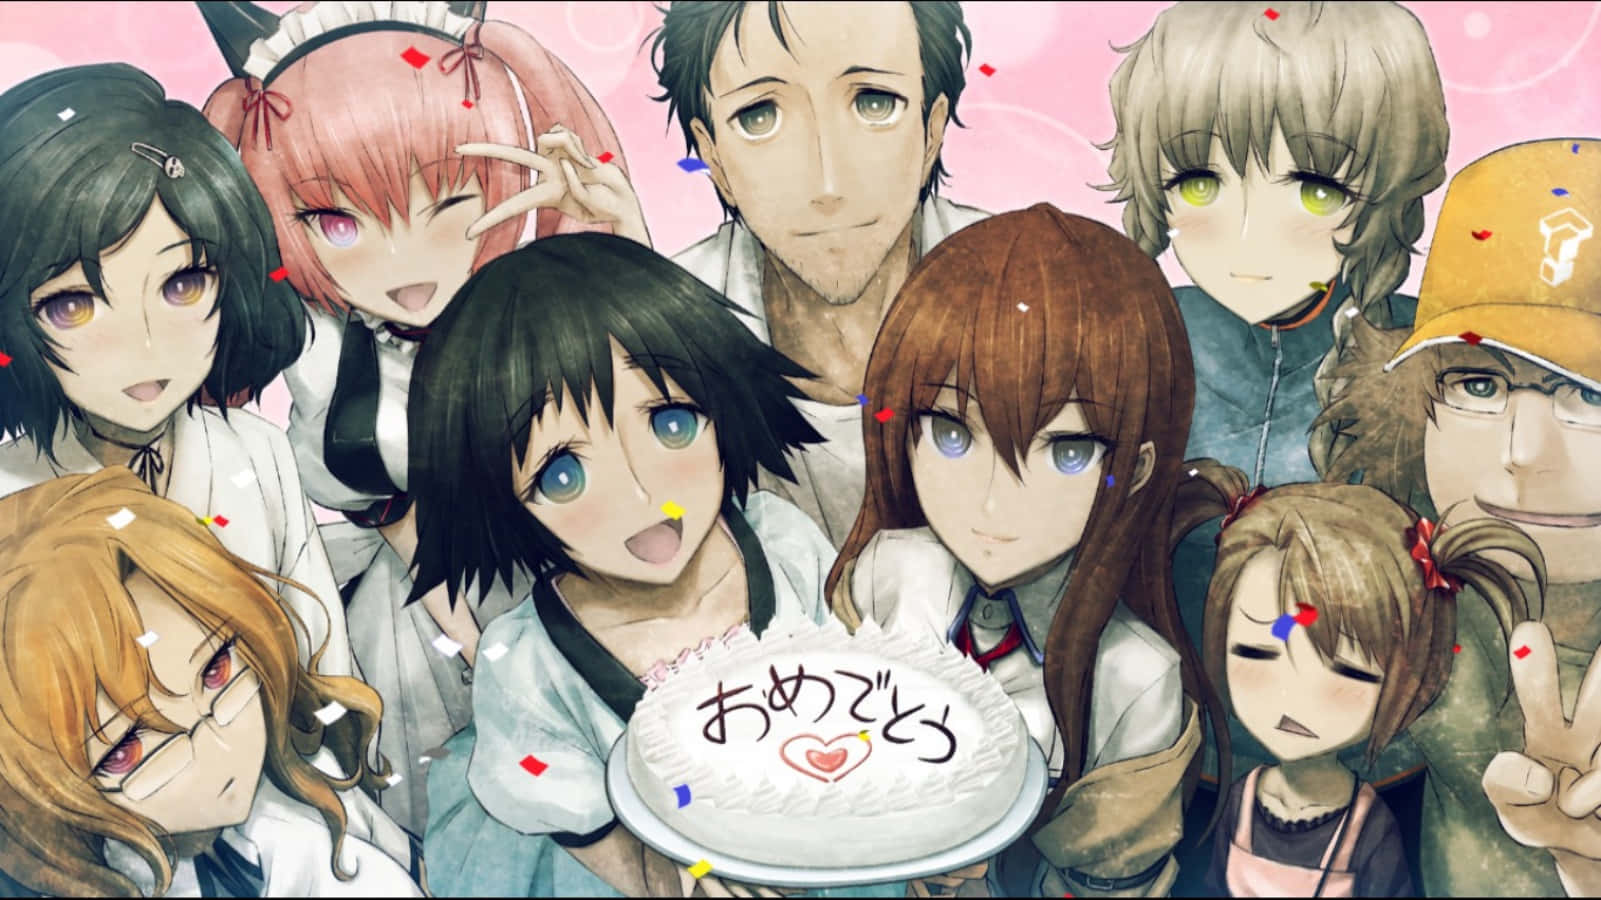 Travel through time with Steins Gate